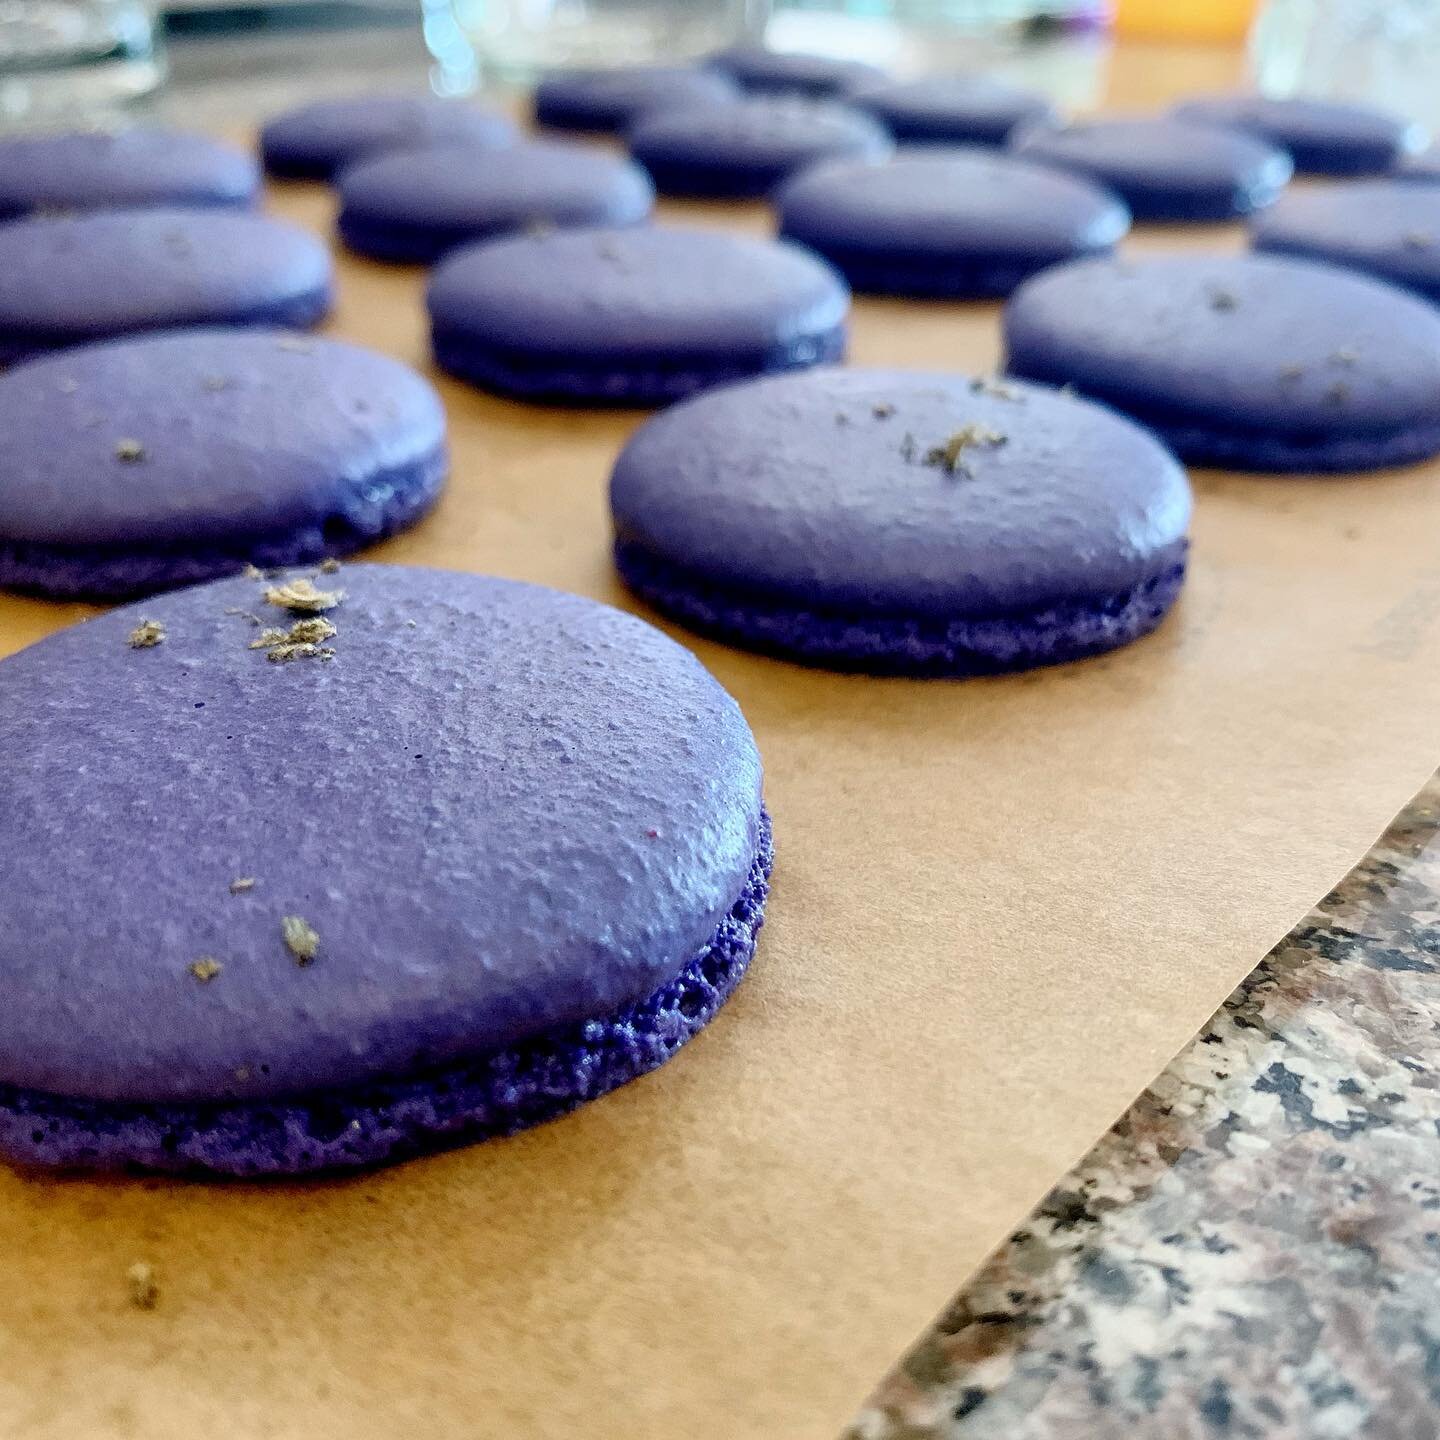 Can you feel the passion (fruit)? PBP&amp;J macarons are just the start of gift boxes for some seriously amazing lawyers! #pbpj #macarons #frenchmacarons #passionfruit #jasminetea #peanutbutter #moxieandsassafras #giftbox #tucson